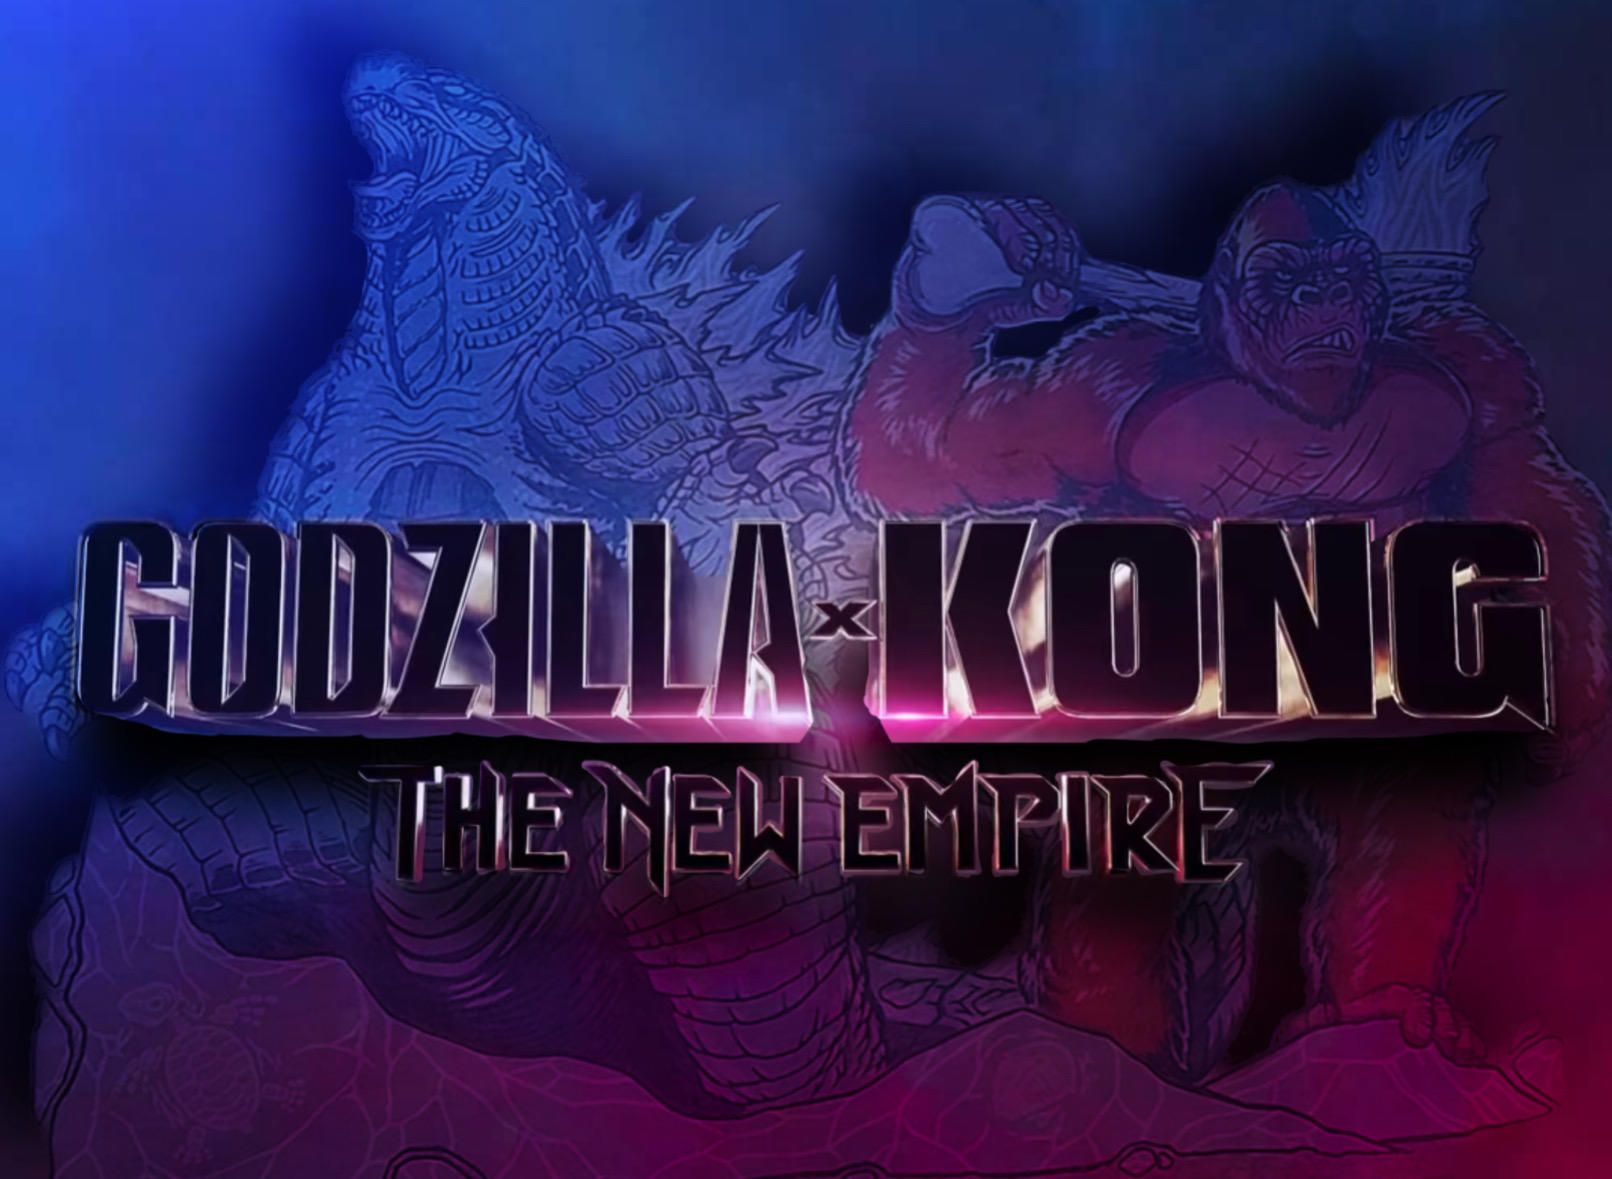 Godzilla x Kong: The New Empire wallpaper Resolution 1612x1179 | Best Download this awesome wallpaper - Cool Wallpaper HD - CoolWallpaper-HD.com